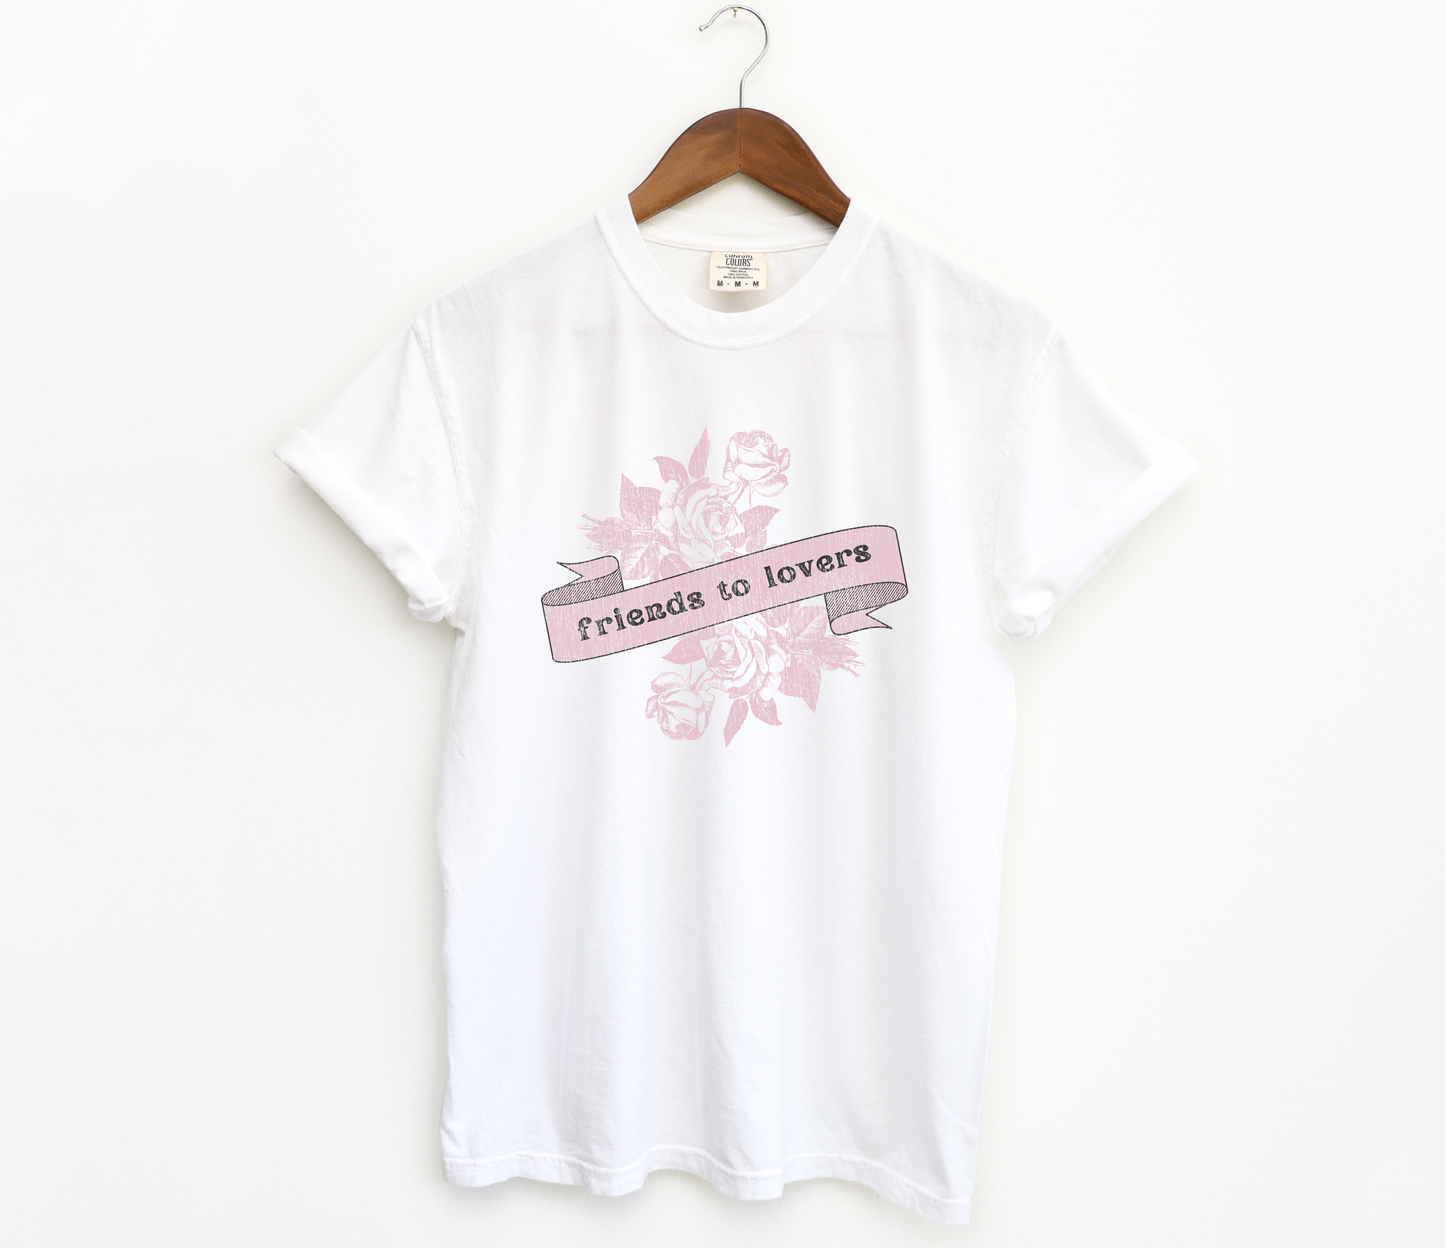 friends to lovers t-shirt in white